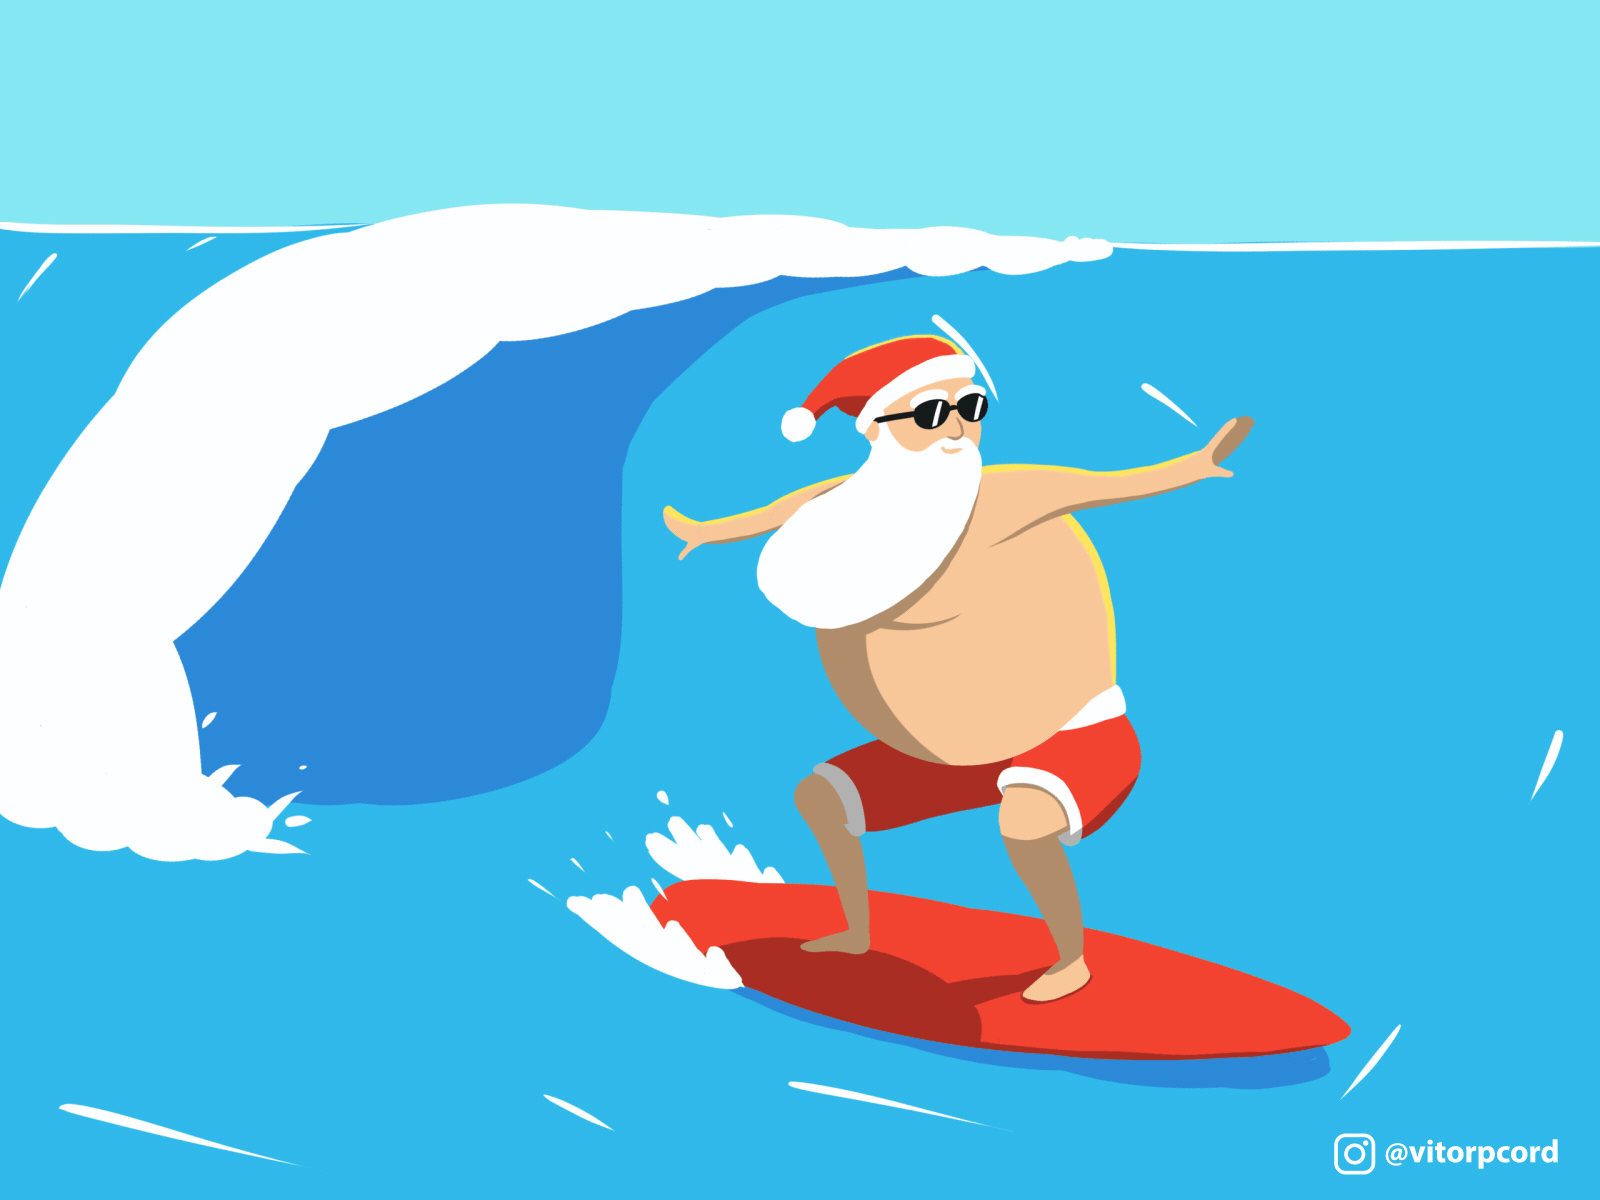 Tropical Santa after effects animation beach christmas gif illustration loop photoshop santa claus surf surfing tropical wave